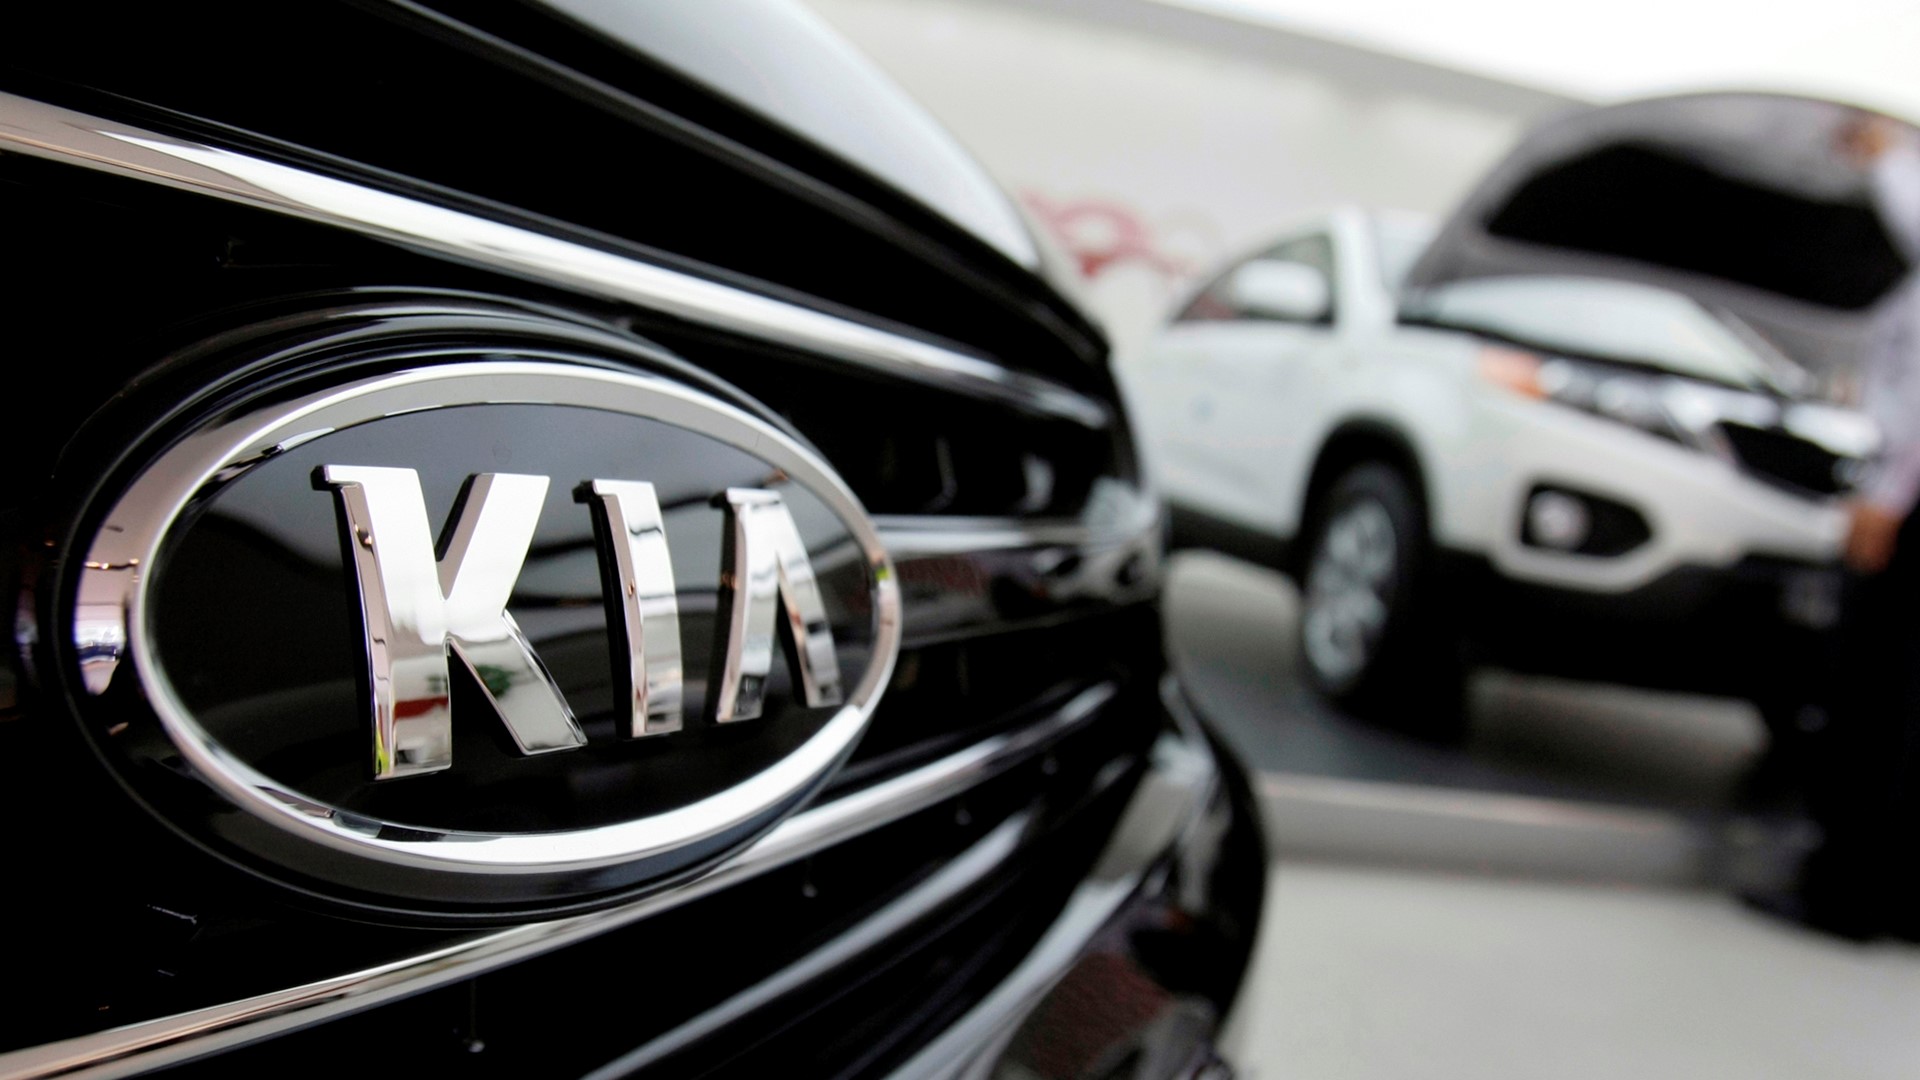 Kia is recalling more than 193,000 cars and minvans in yet another move to fix nagging problems that could cause engine fires.